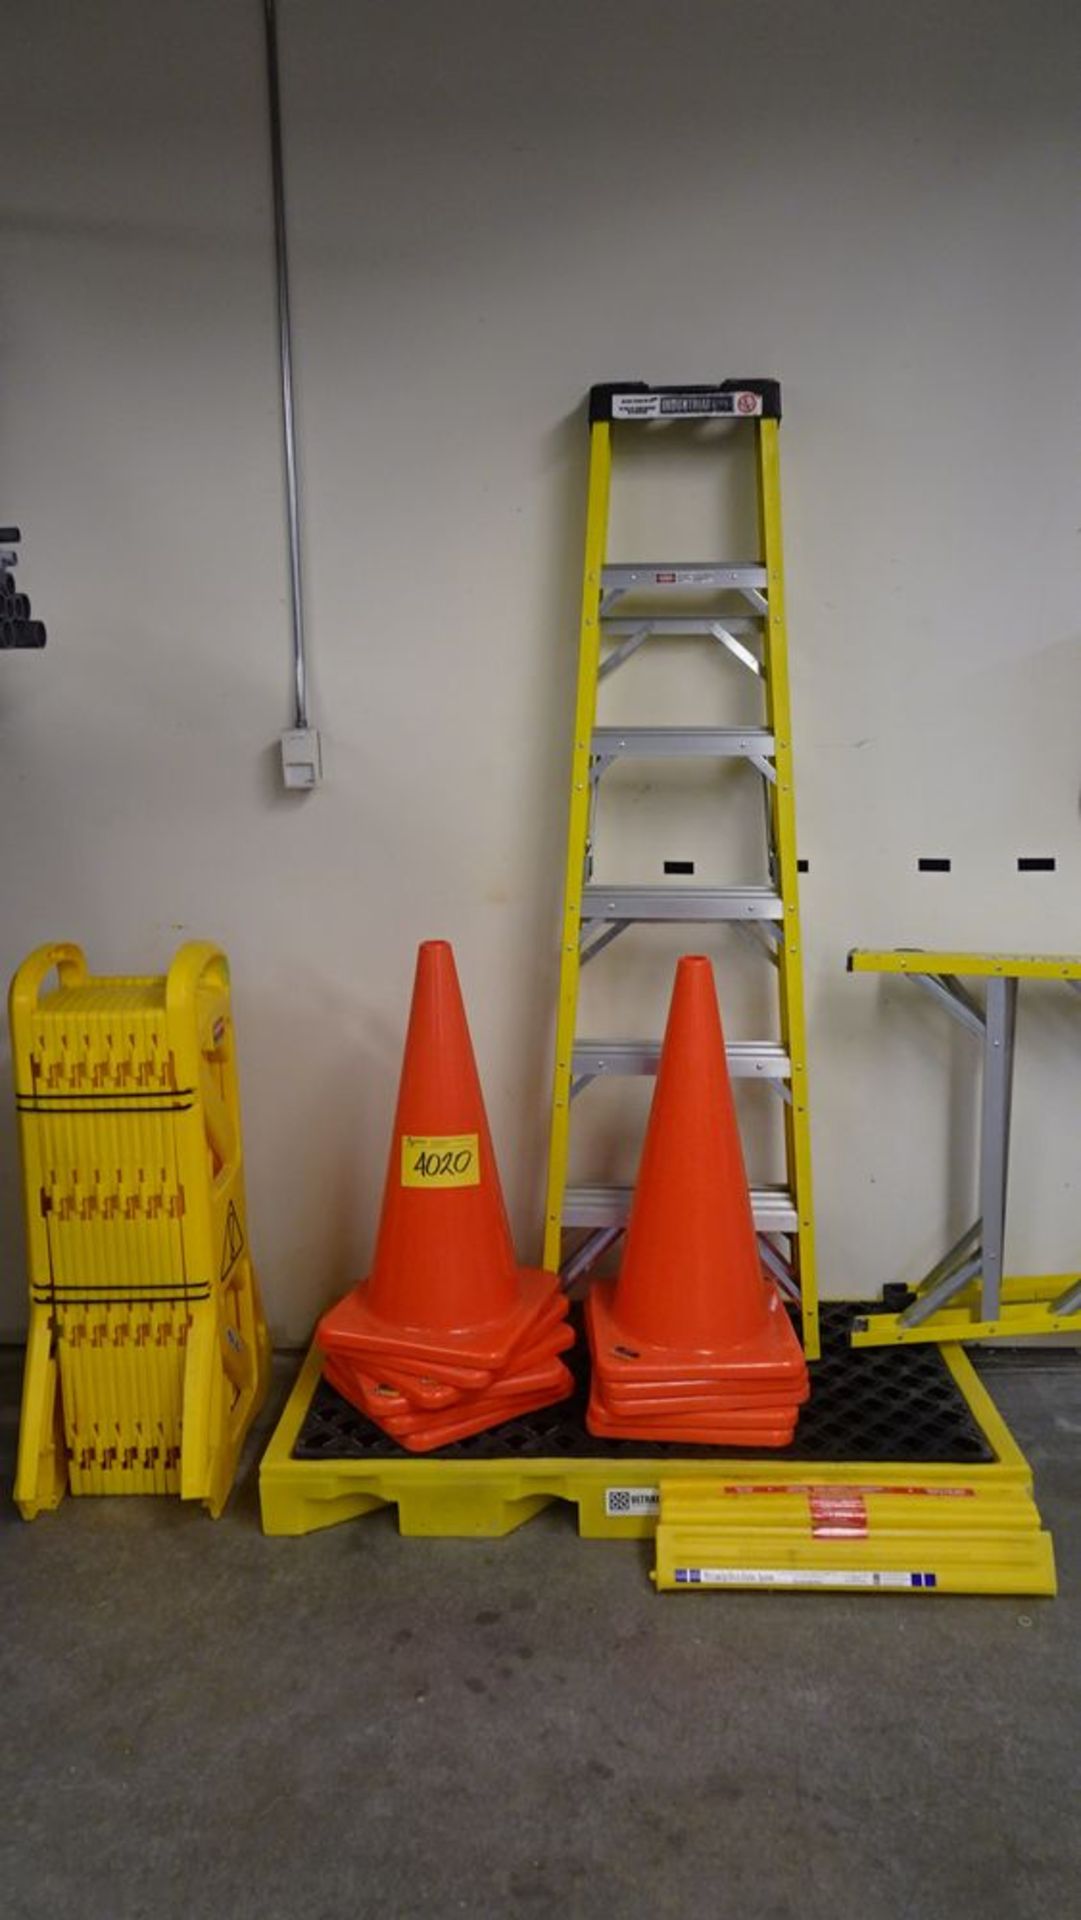 LITE 6' LADDER, SAFETY CONES, FAN, RUBBERMAID SAFETY CURTAIN (REUTER)